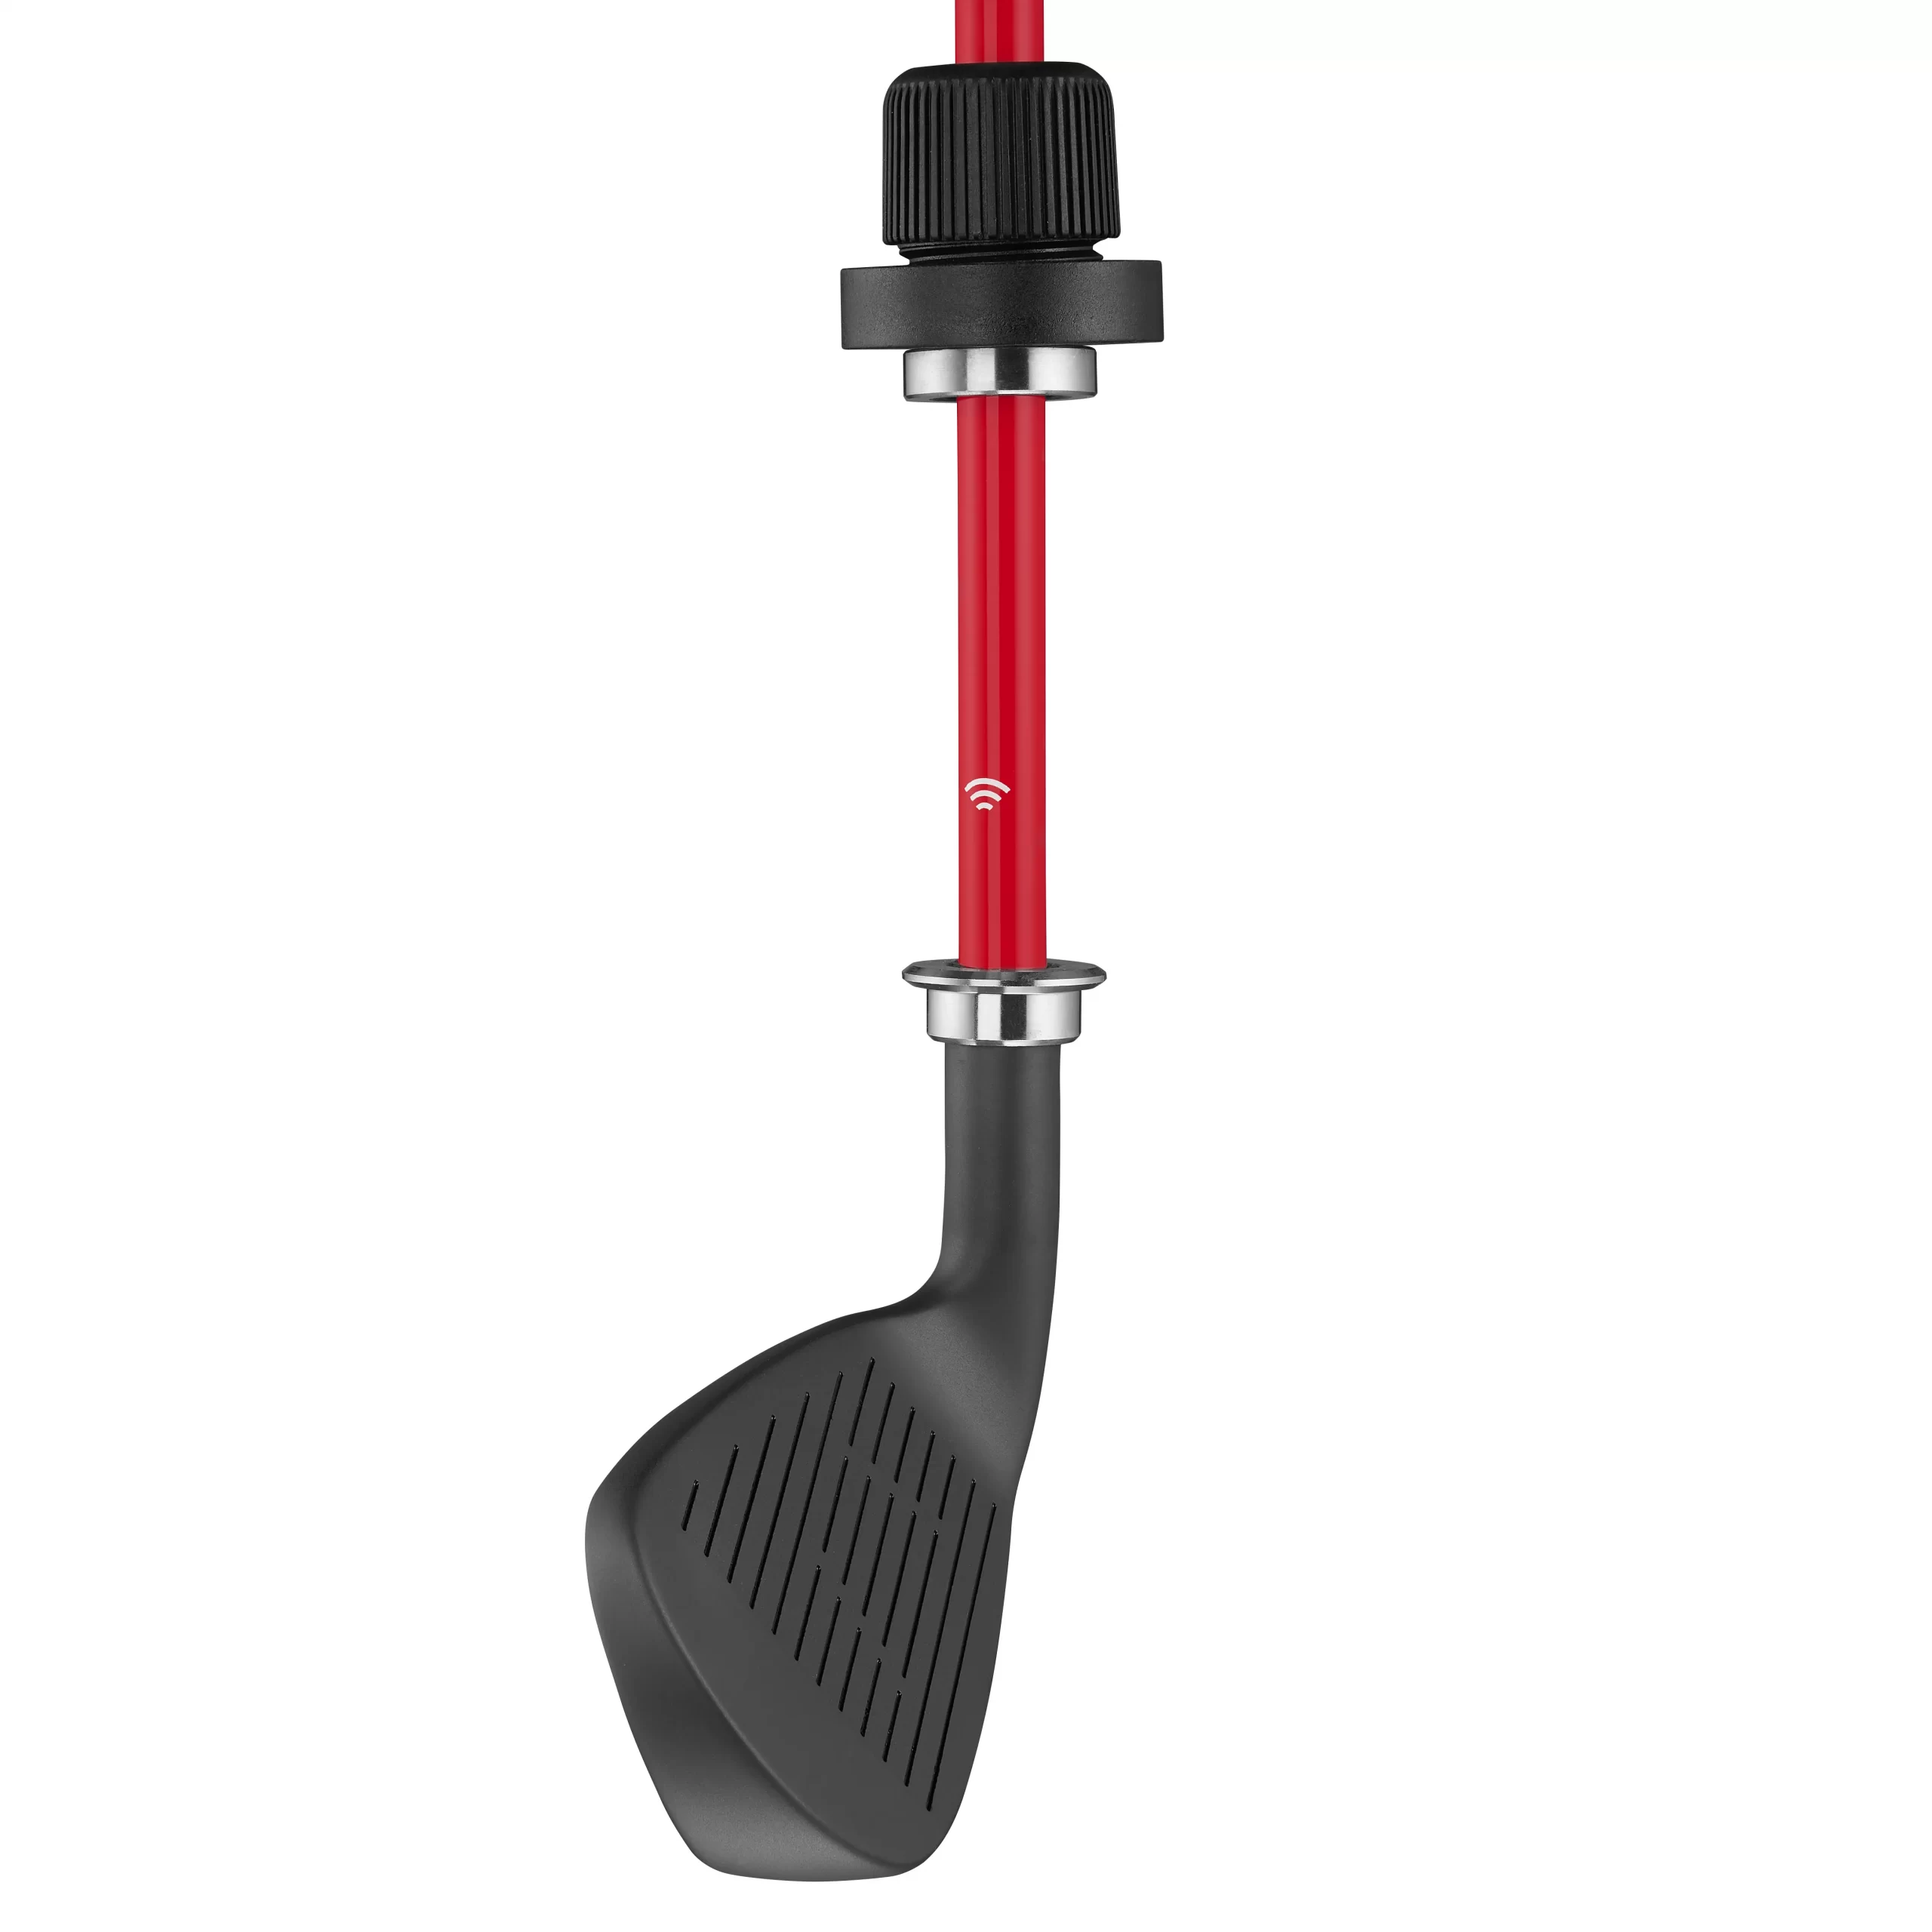 Click Stick image showing the bottom of the product